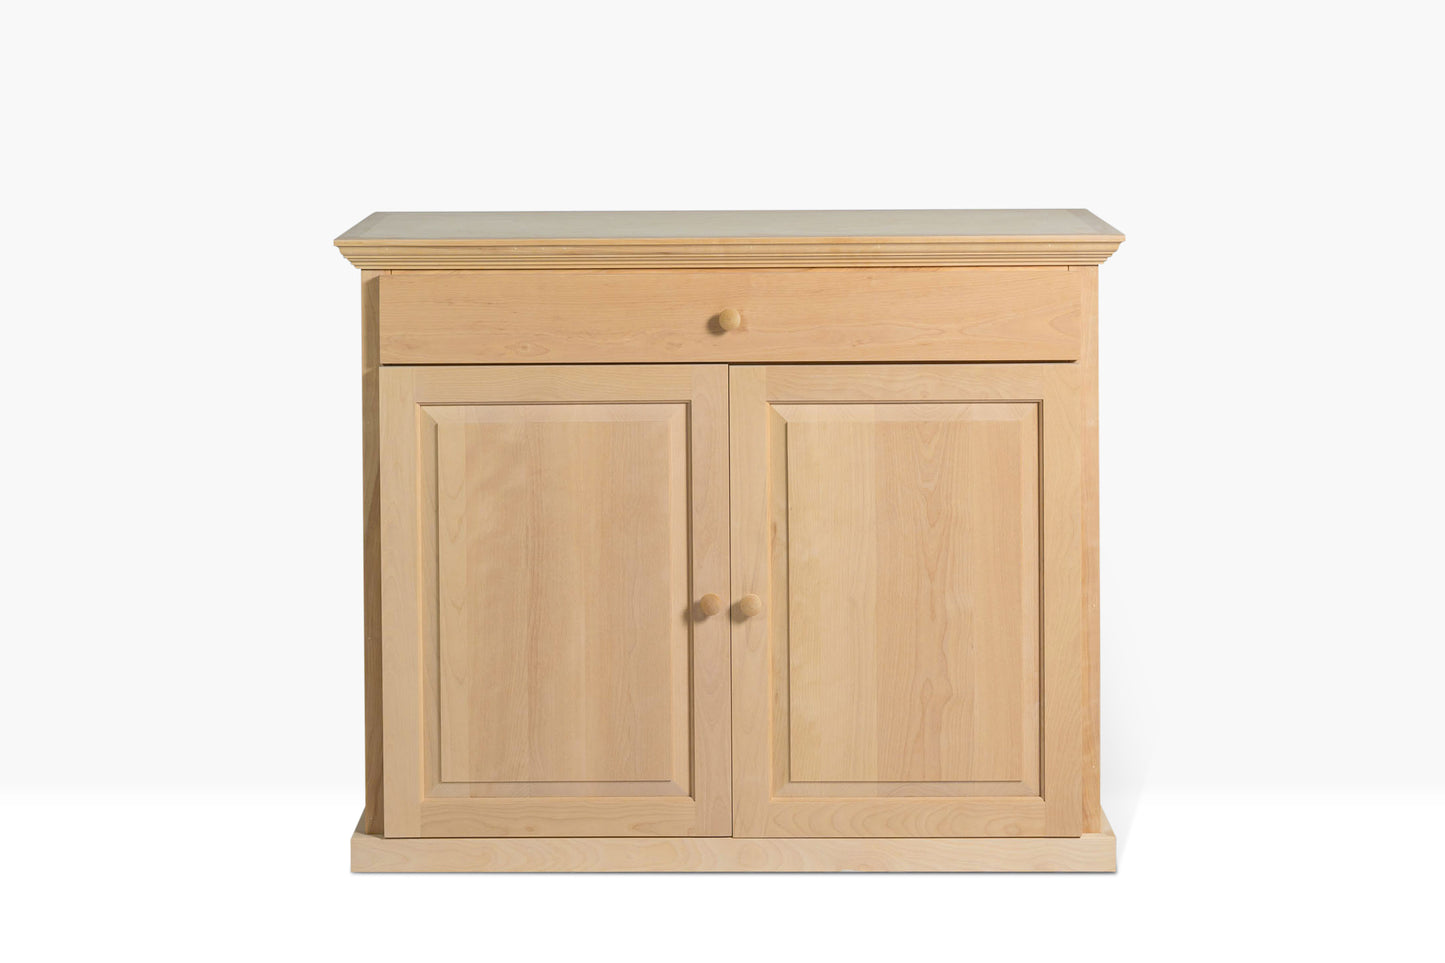 Berkshire Dover Cabinet with Drawer with birch construction, shown unfinished.  Features one drawer and adjustable shelving.